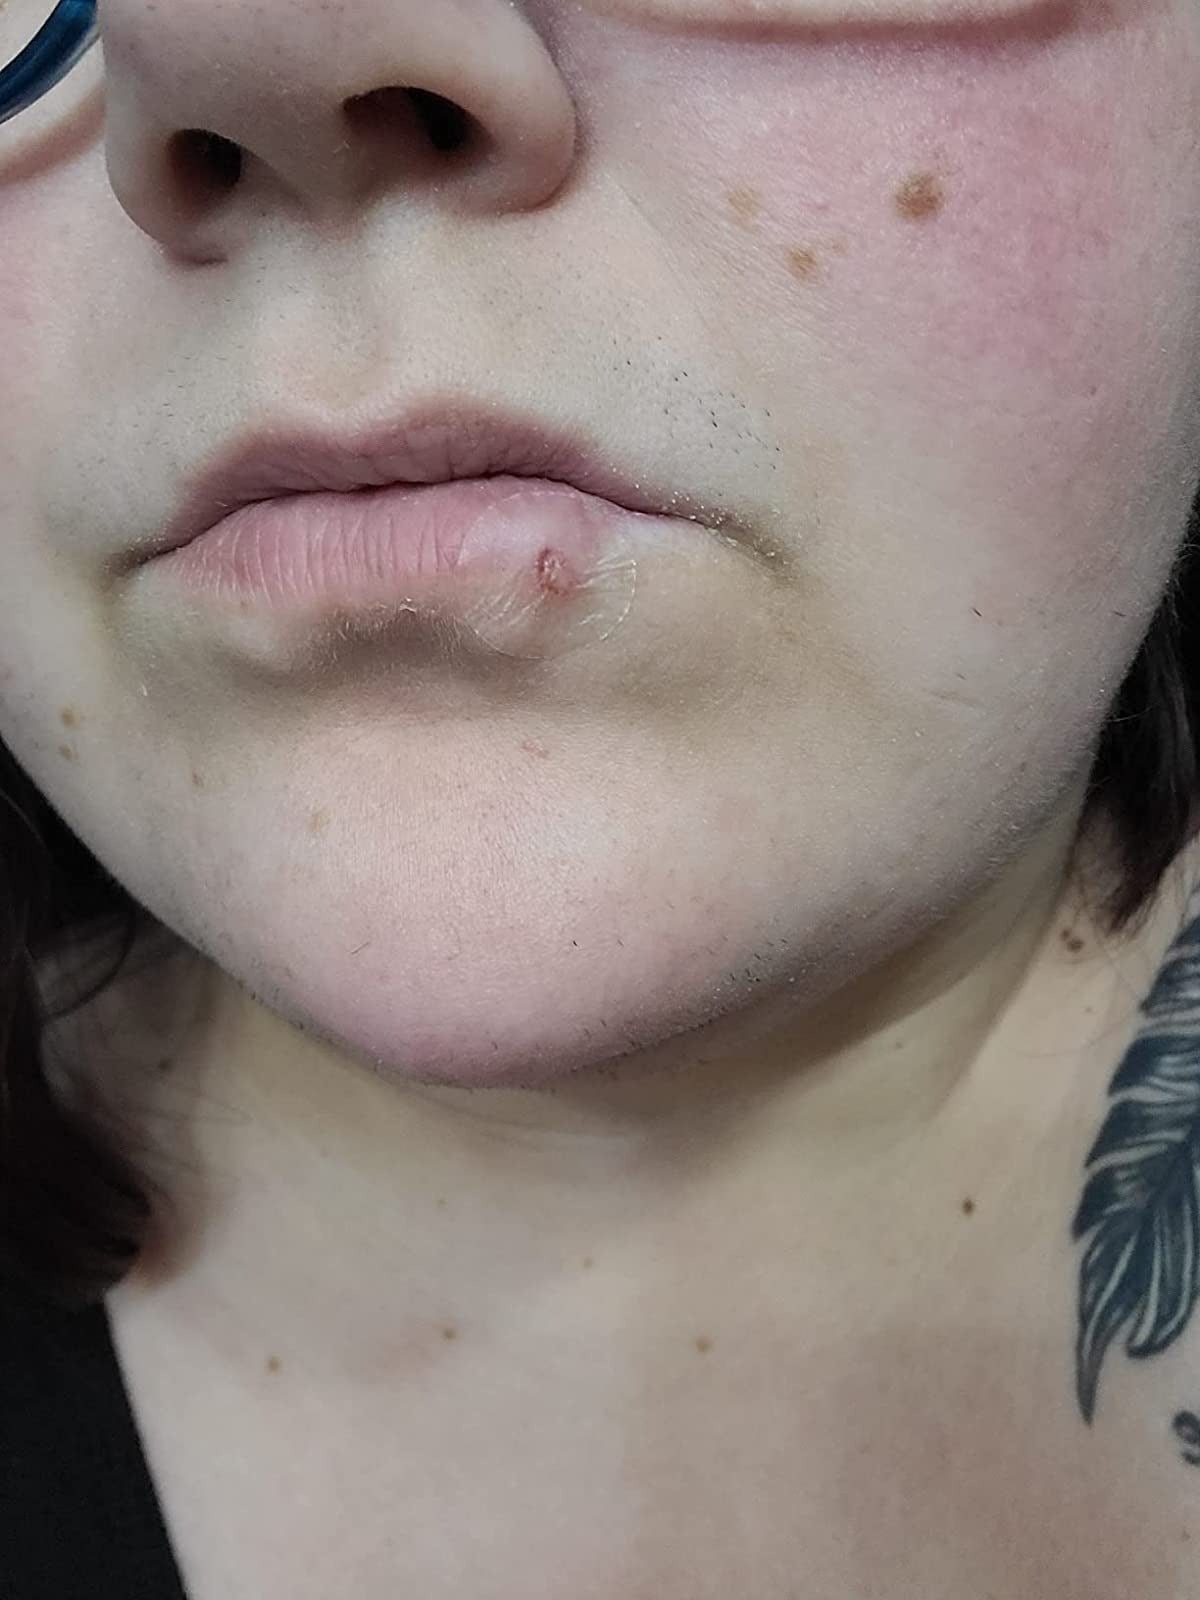 image of a patch on a cold sore on a reviewer's lip